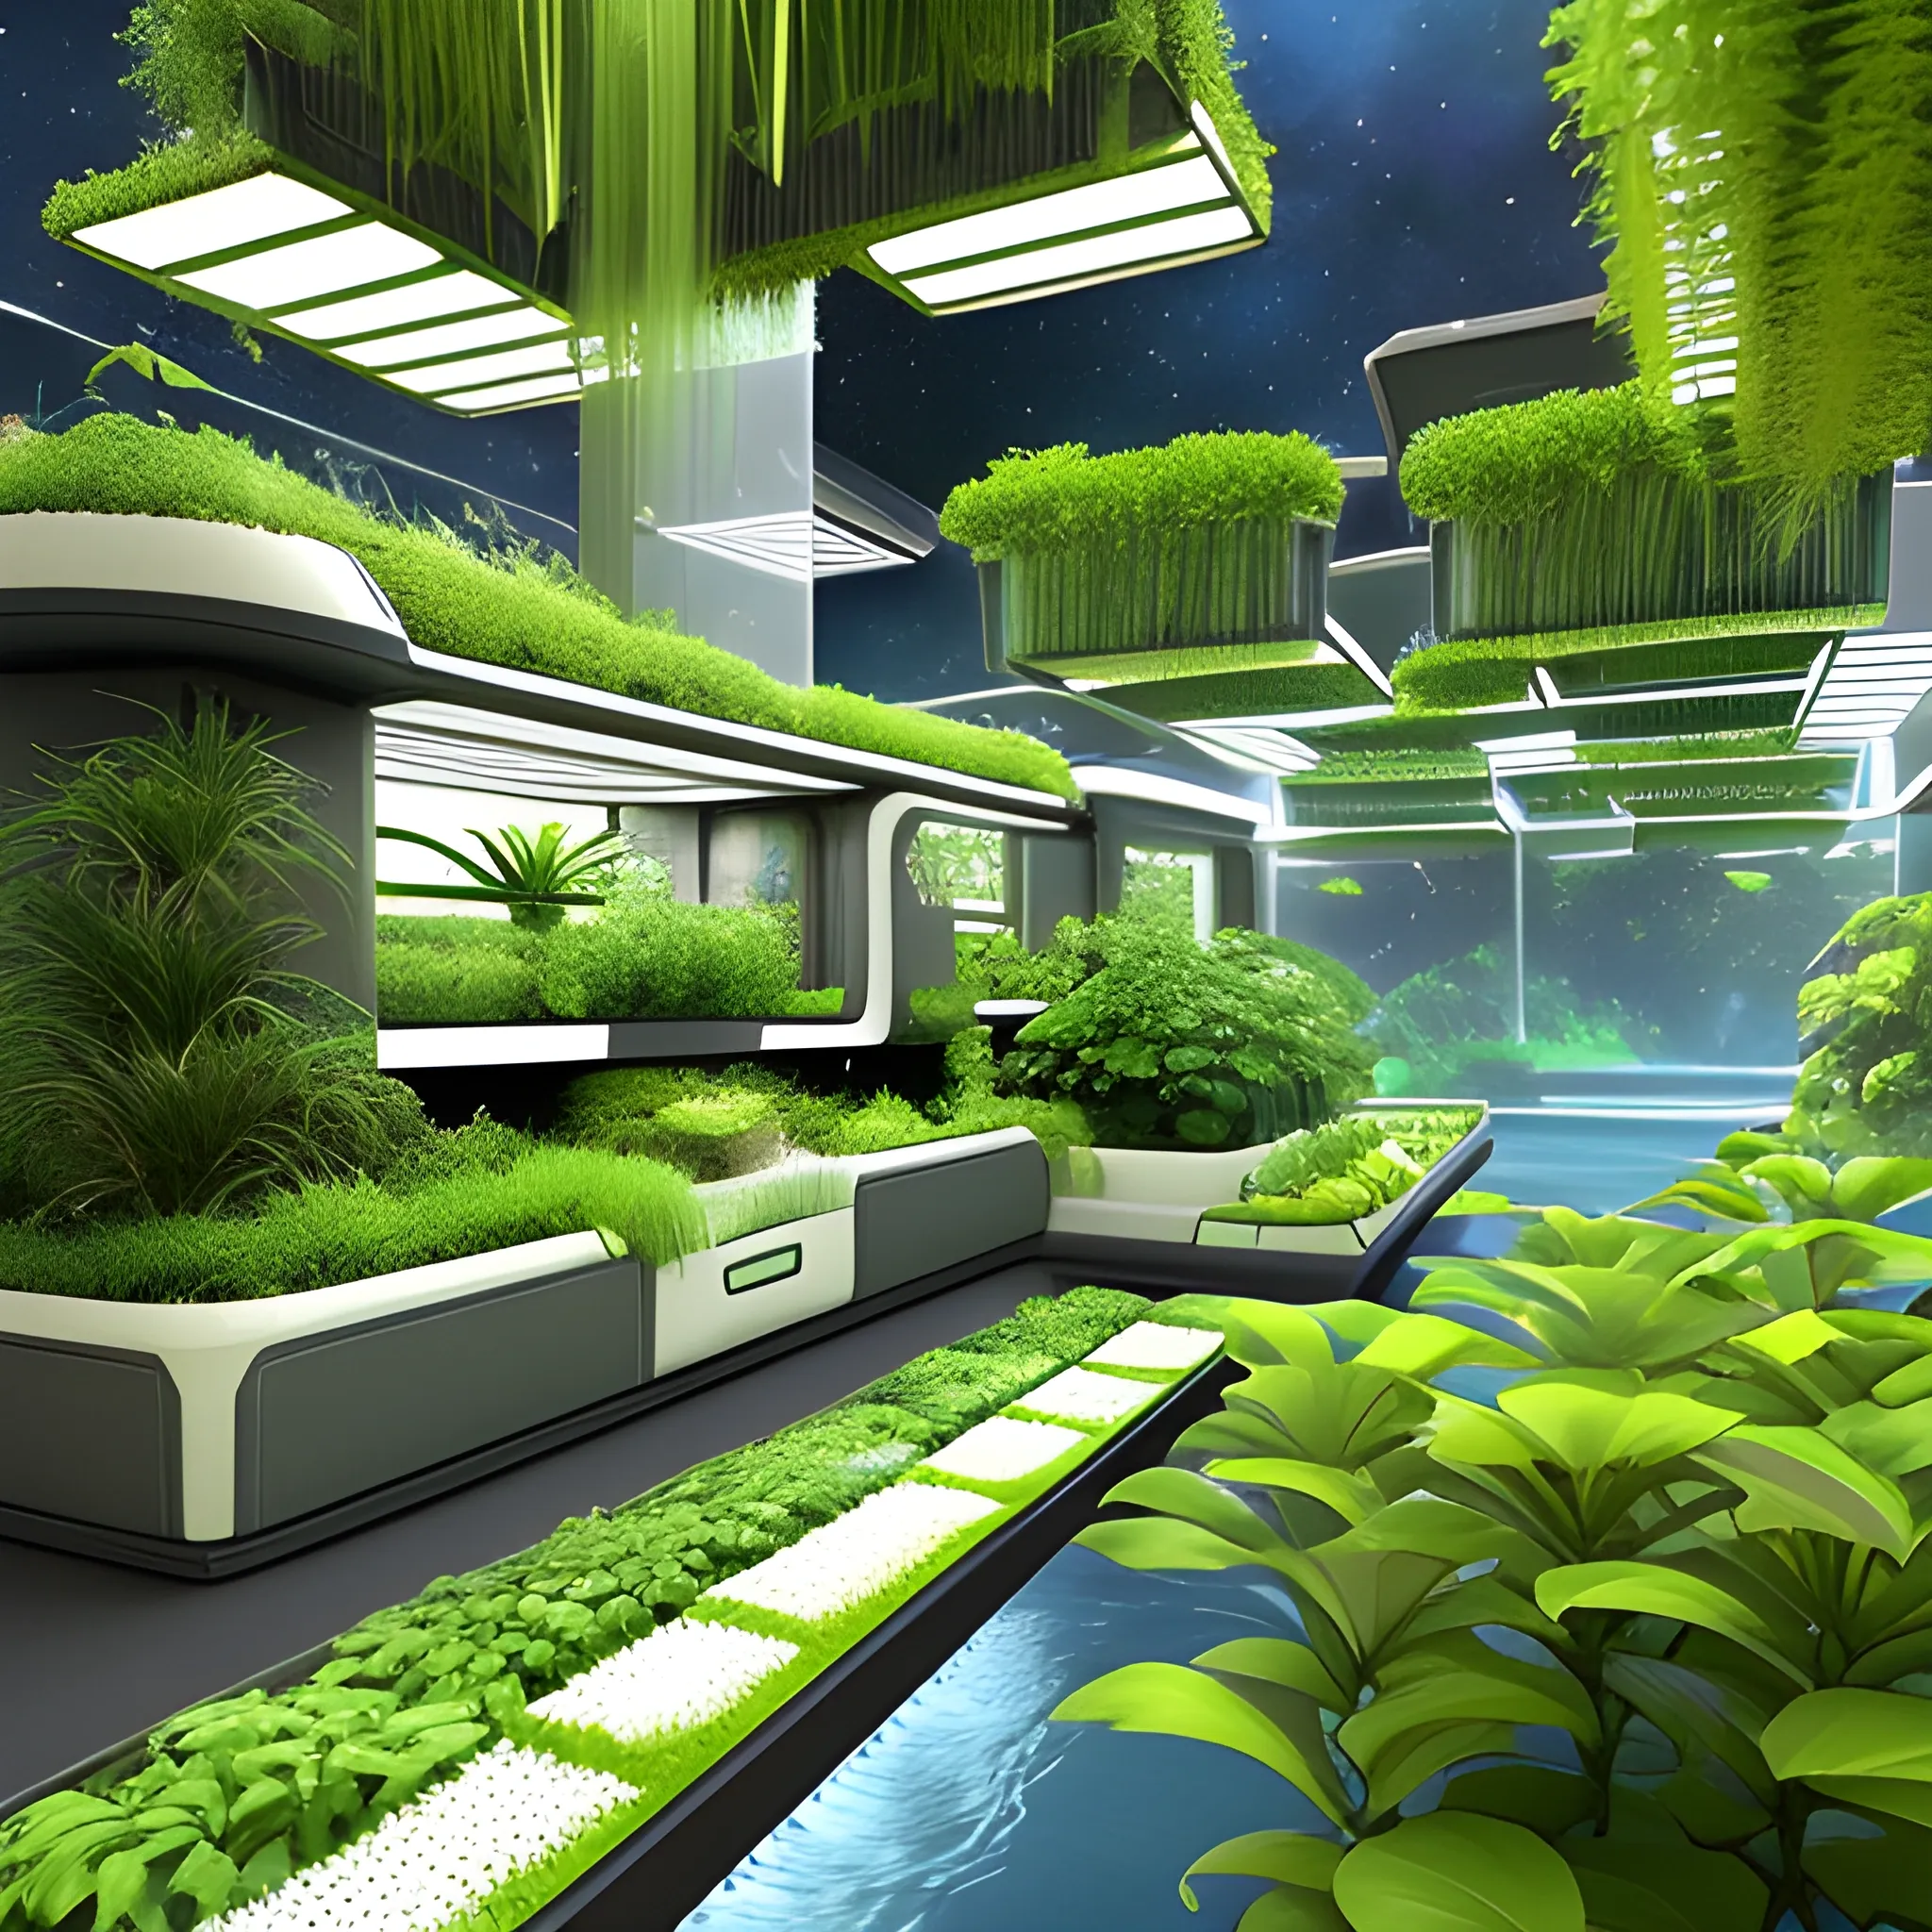 Create an image of a serene and peaceful space habitat, with plants growing in hydroponic gardens and people going about their daily lives. The scene should be filled with a sense of tranquility and contentment, as though this habitat is a little slice of home in the vastness of space., 3D, 3D, 3D, 3D, 3D